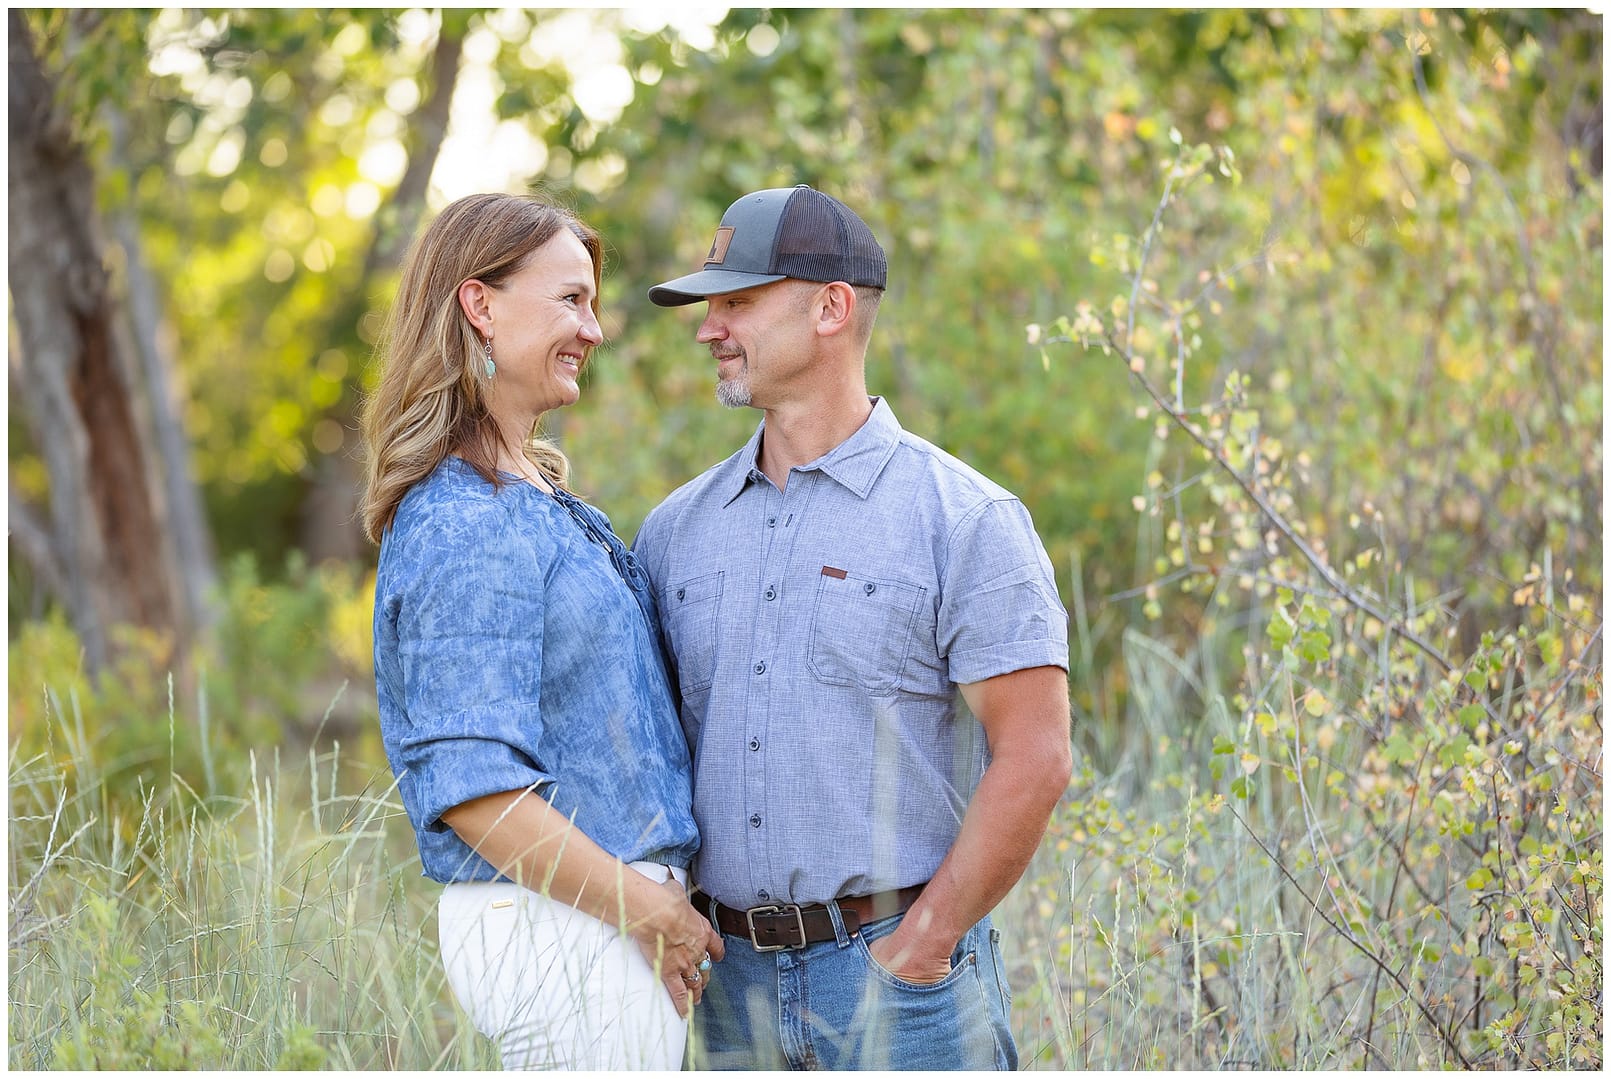 Mom and dad lovingly look at one another during family photos on the Boise greenbelt. Photo by Tiffany Hix Photography.